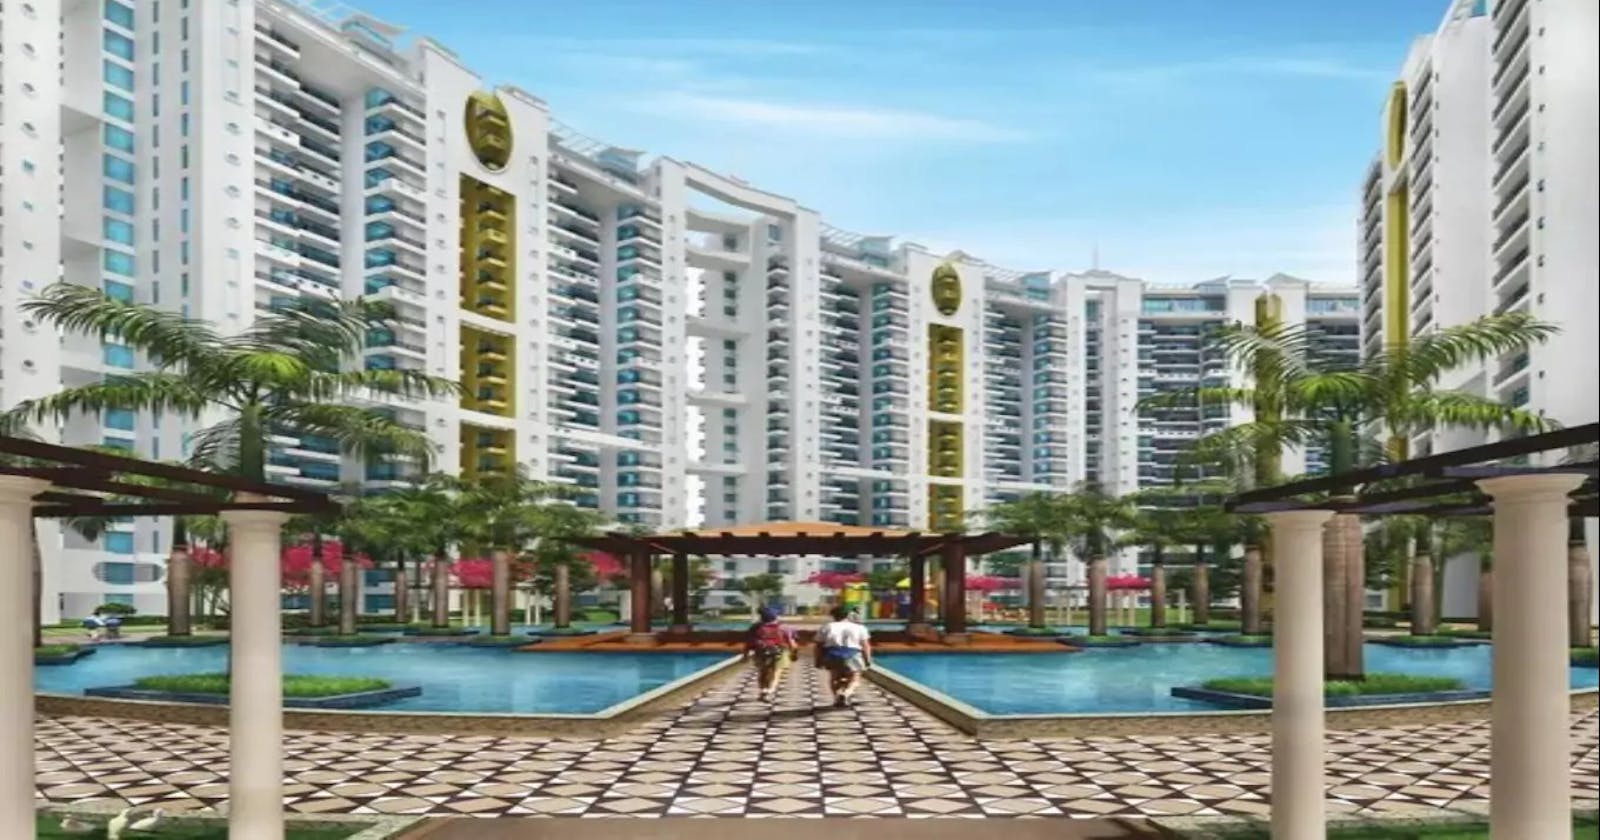 Why Sector 143 Noida is the Perfect Location for Residential Investment?